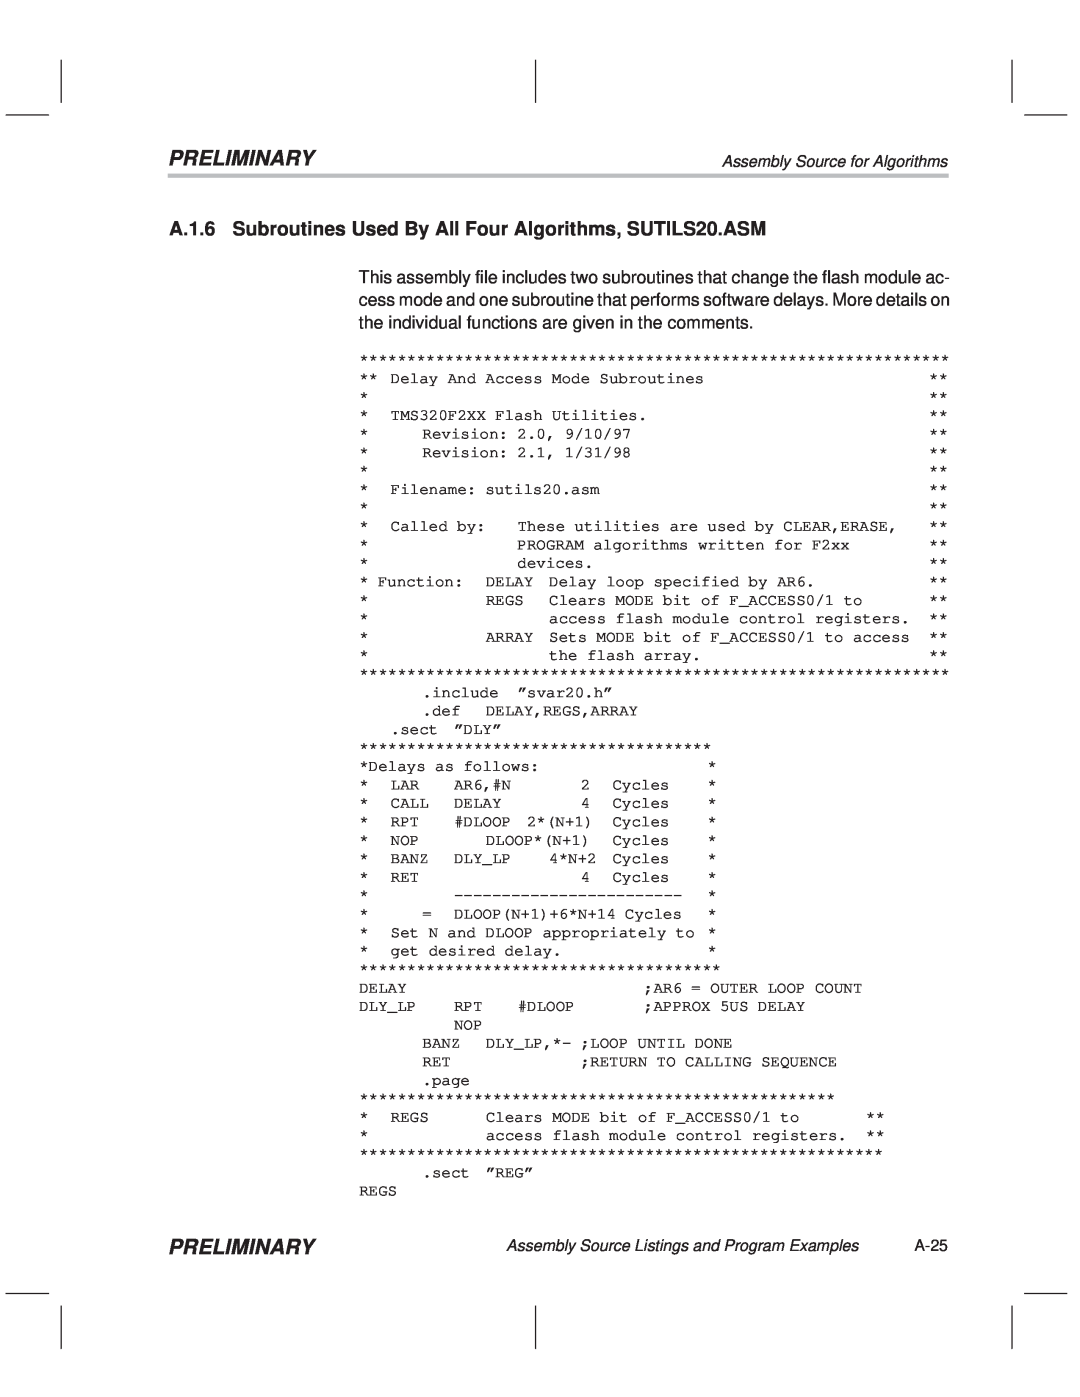 Texas Instruments TMS320F20x/F24x DSP manual A.1.6 Subroutines Used By All Four Algorithms, SUTILS20.ASM, Preliminary, A-25 